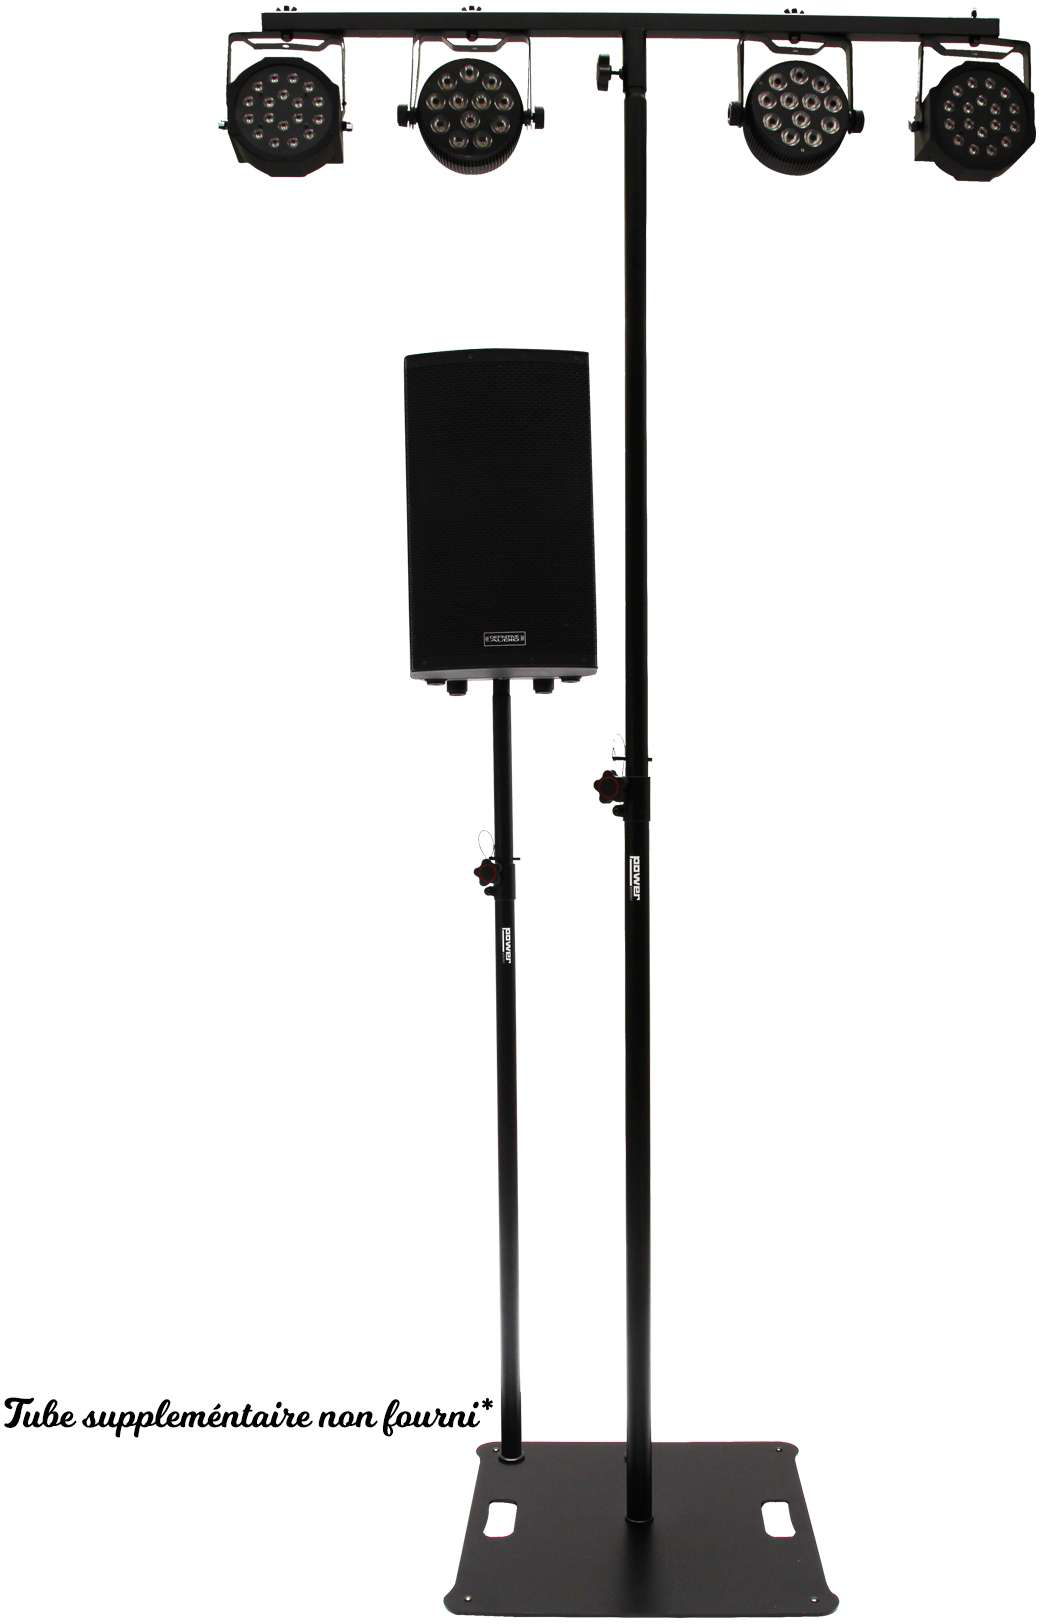 Power Acoustics Lsa 240 Bl - Lighting stand - Main picture